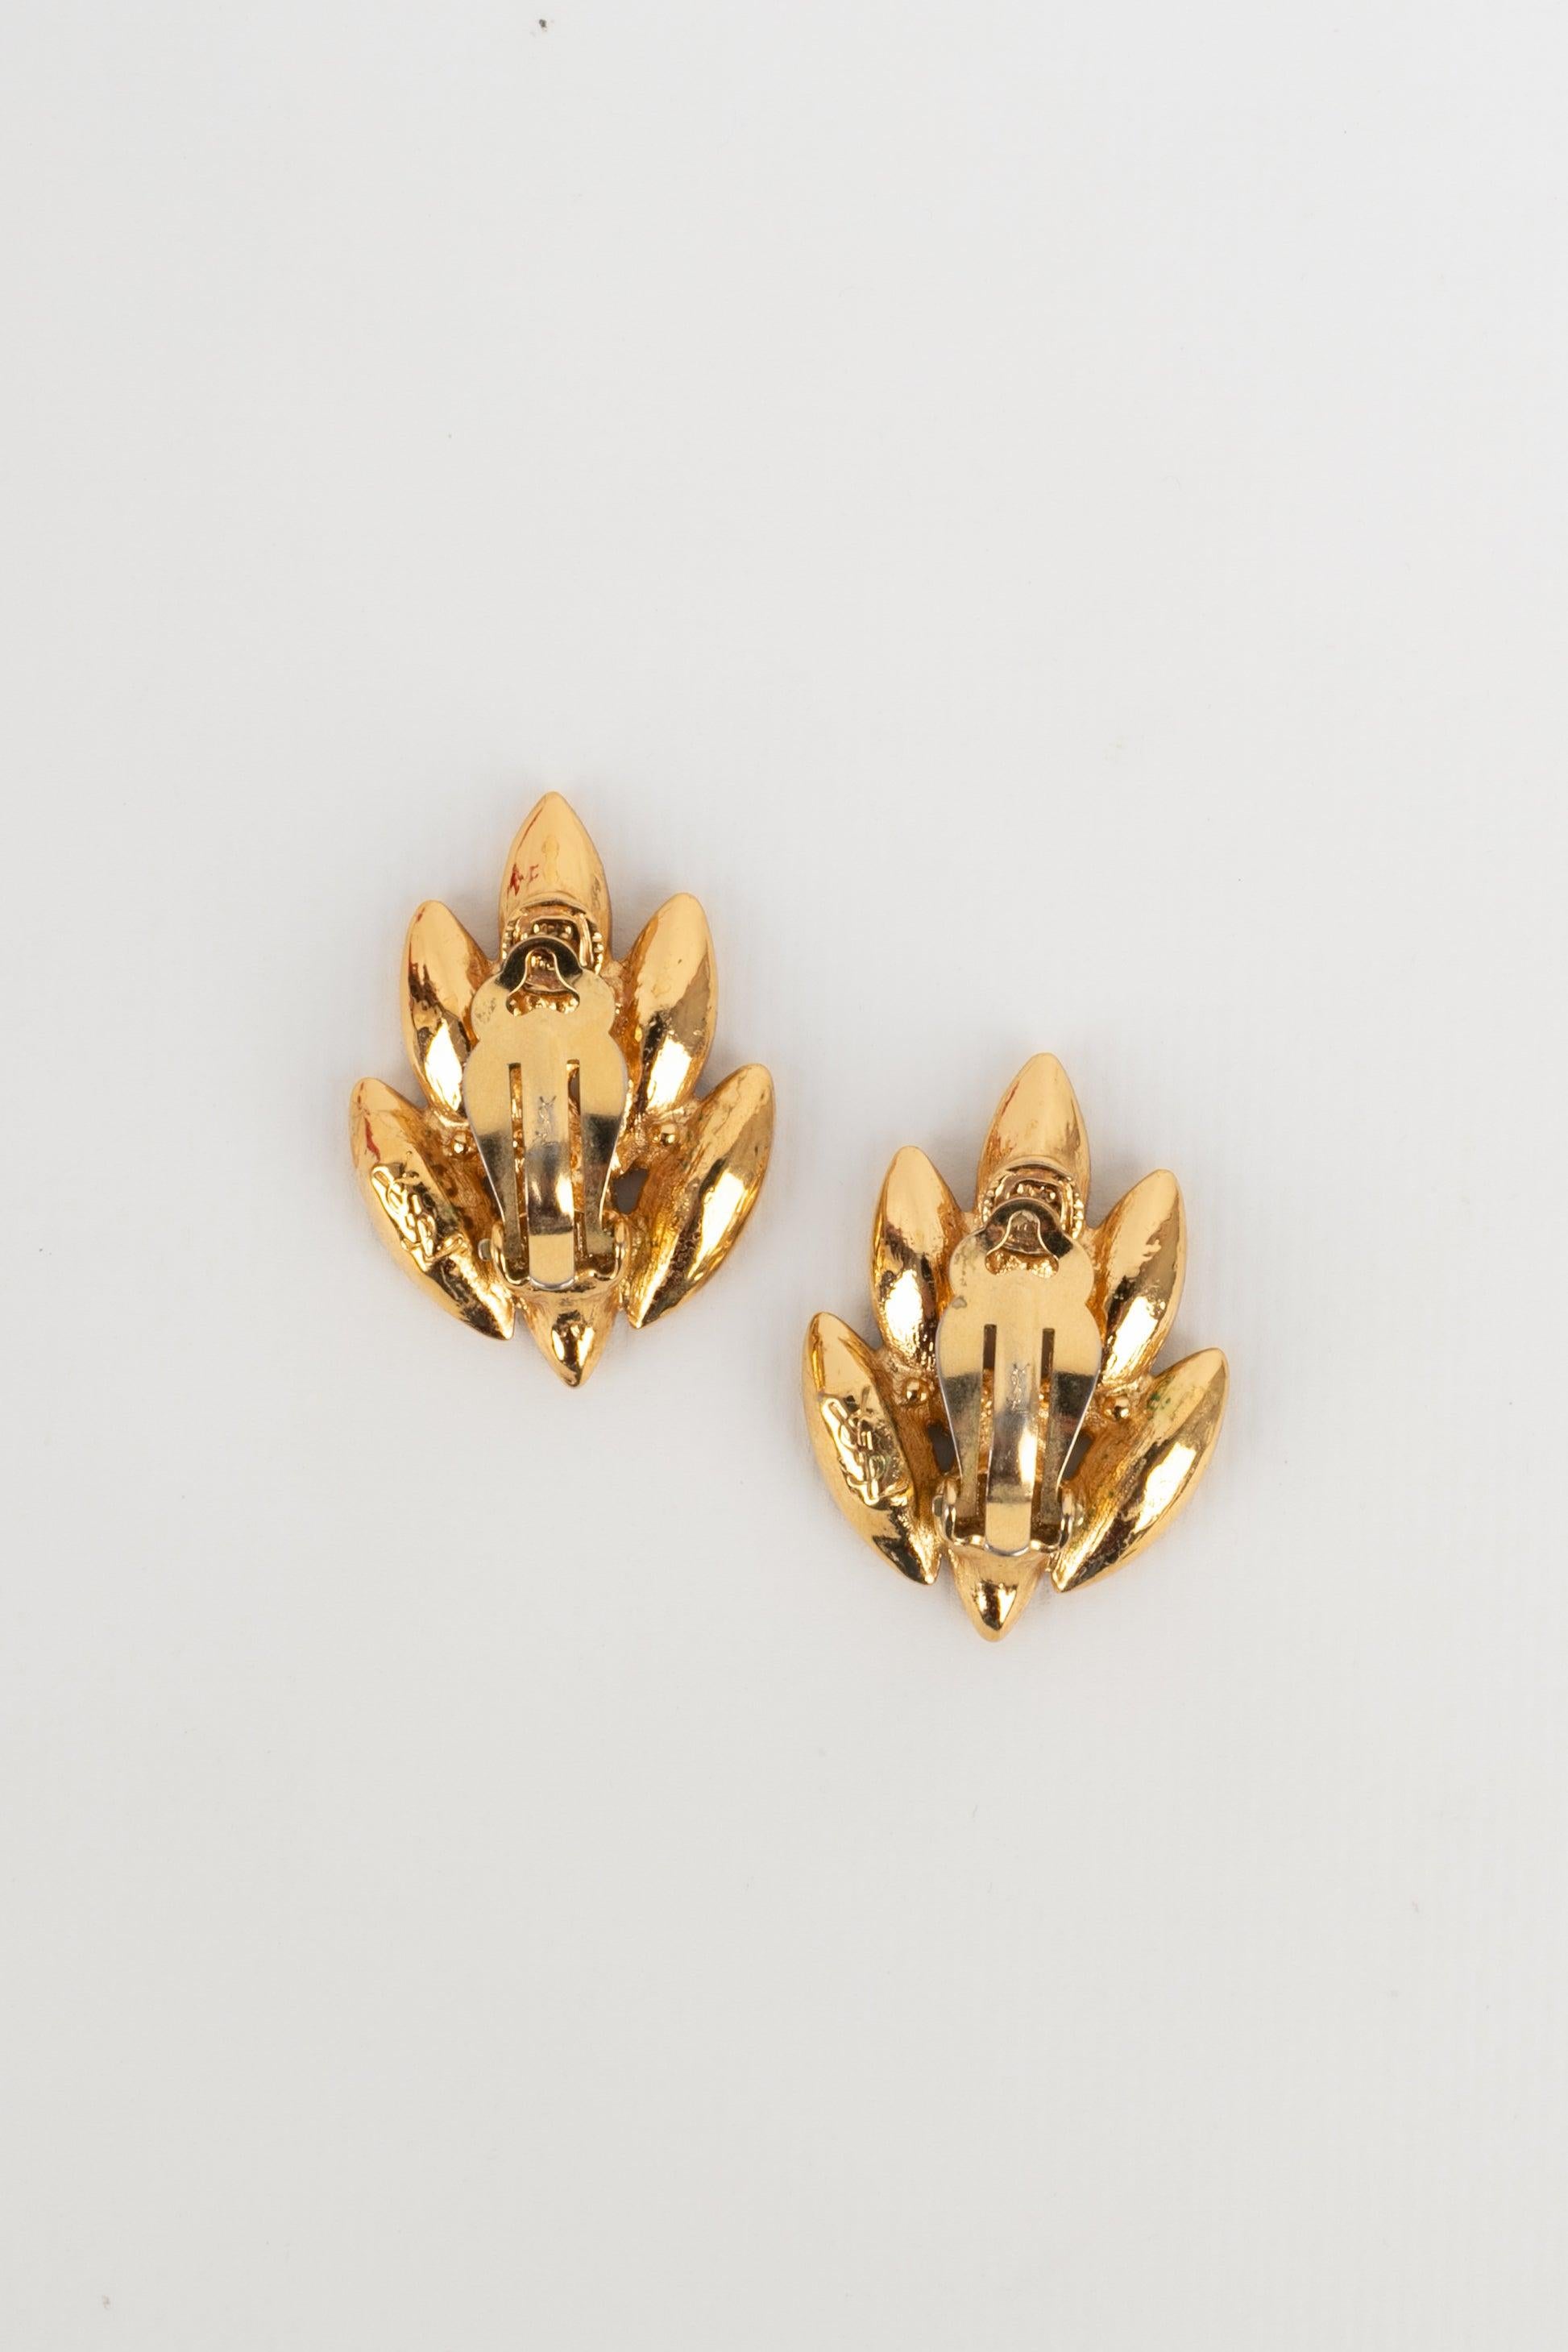 Yves Saint Laurent Golden Metal Clip-On Earrings with Blue Rhinestones In Excellent Condition For Sale In SAINT-OUEN-SUR-SEINE, FR